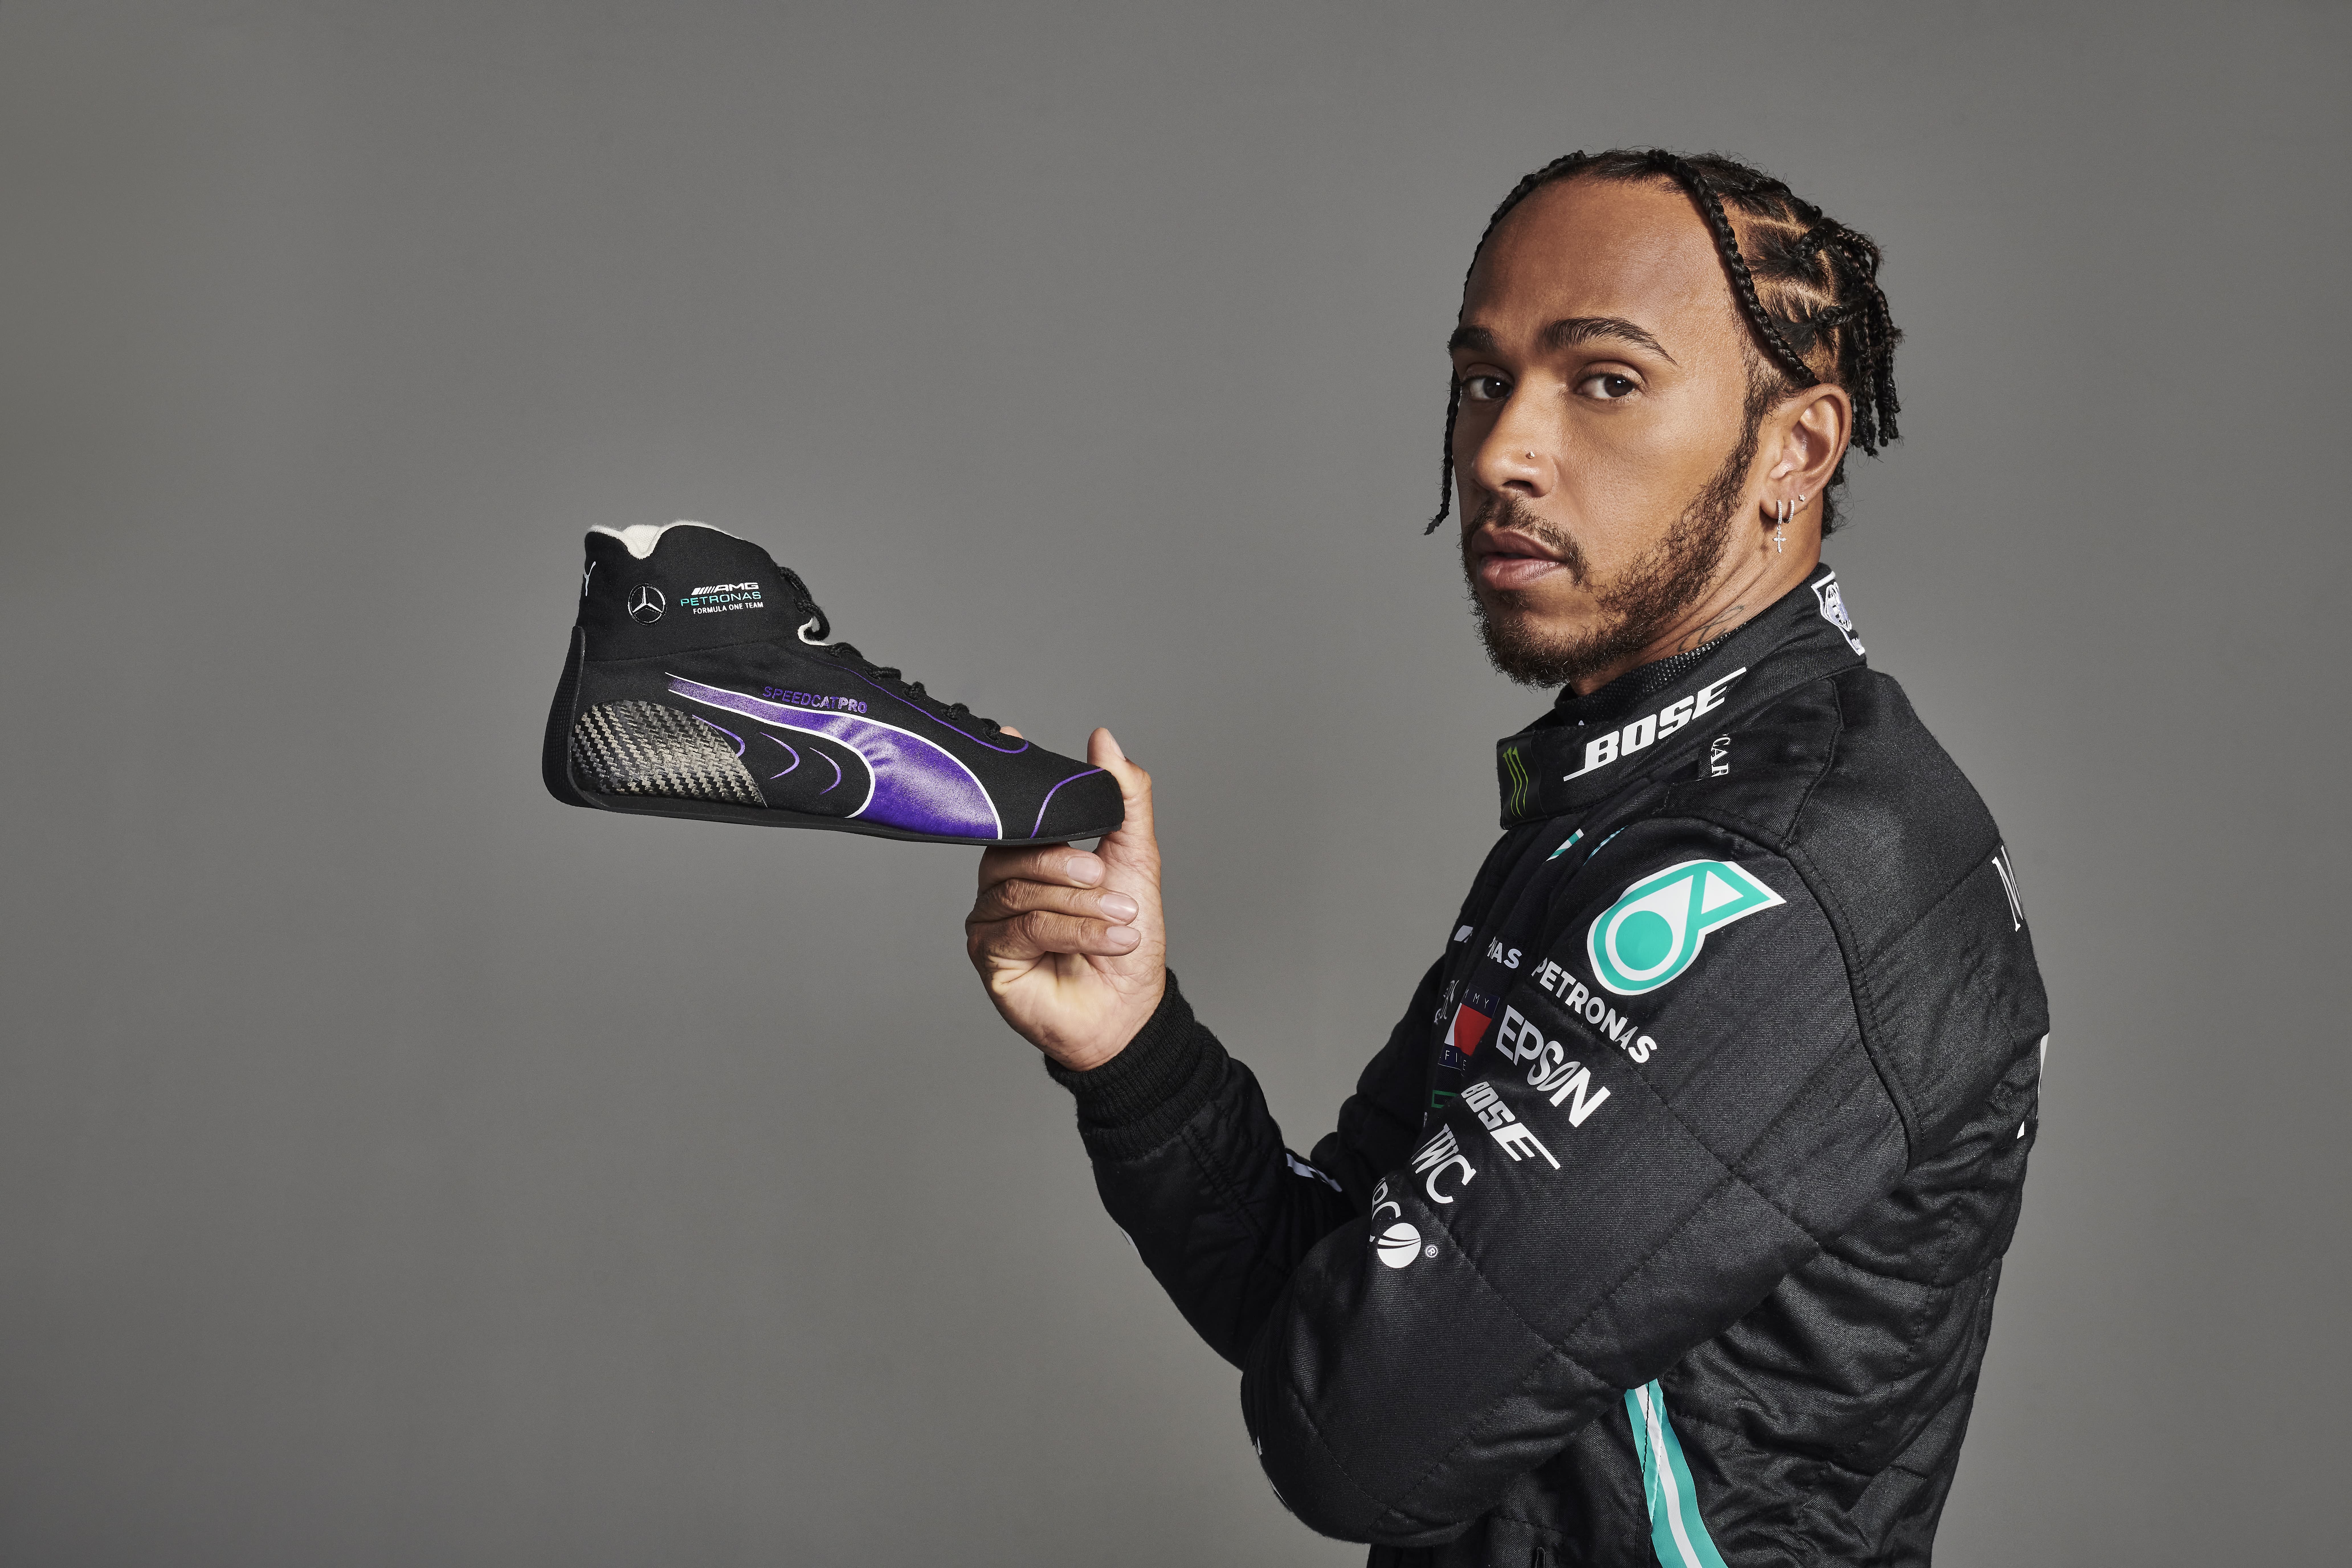 Puma unleashes the fastest shoes with the very first sales premiere of the mercedes amg petronas f1 team speedcat pro of lewis hamilton